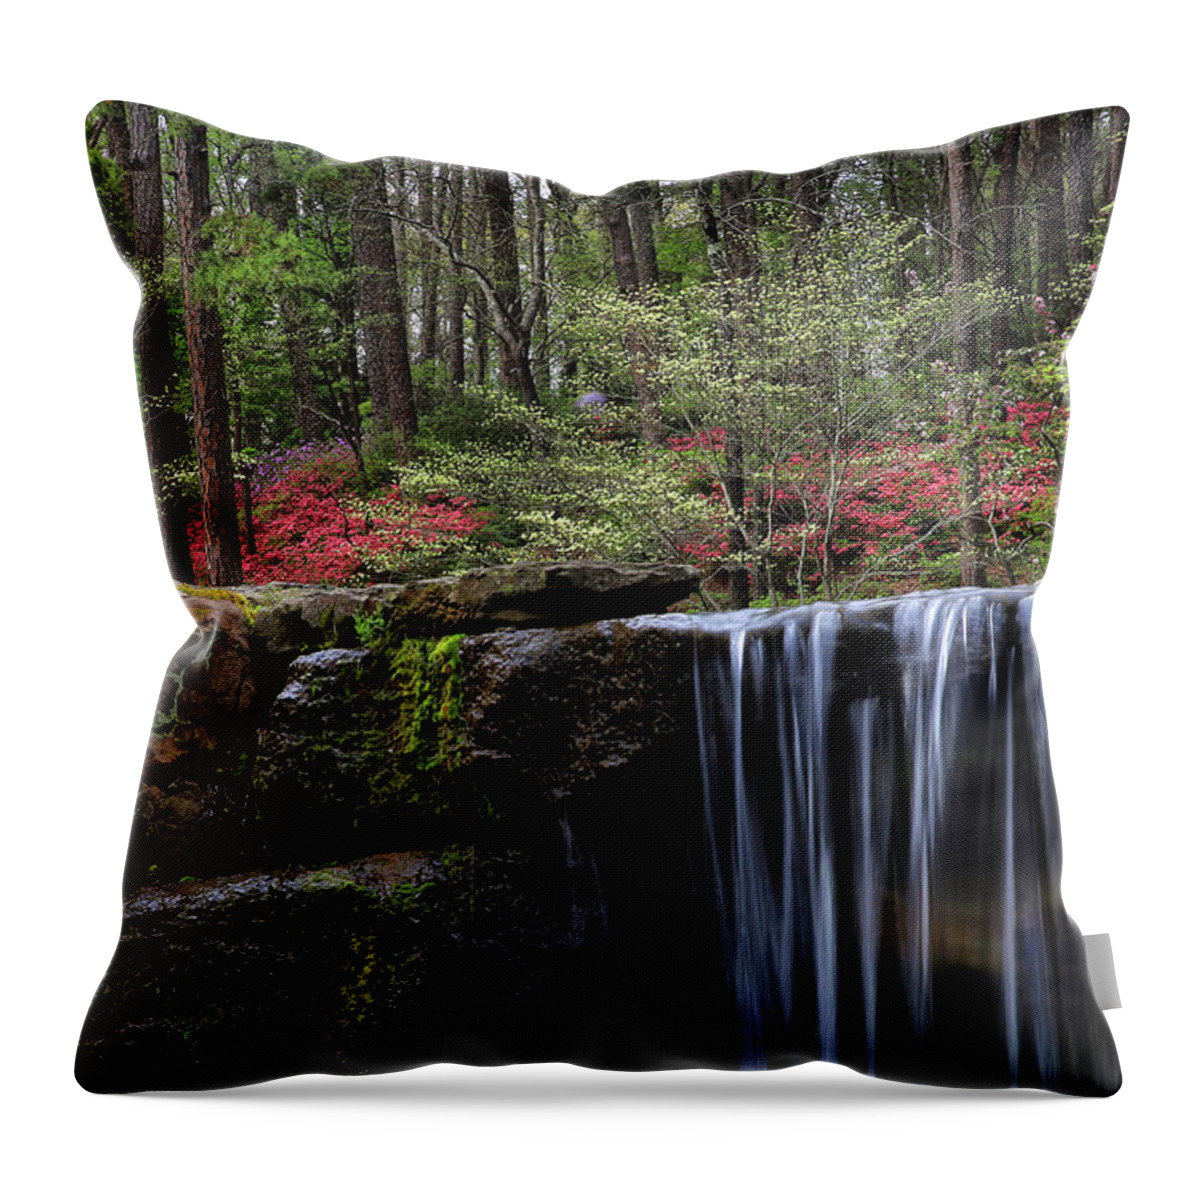 Waterfall Throw Pillow featuring the photograph Dogwood Falls - Garvan Woodland Gardens by William Rainey